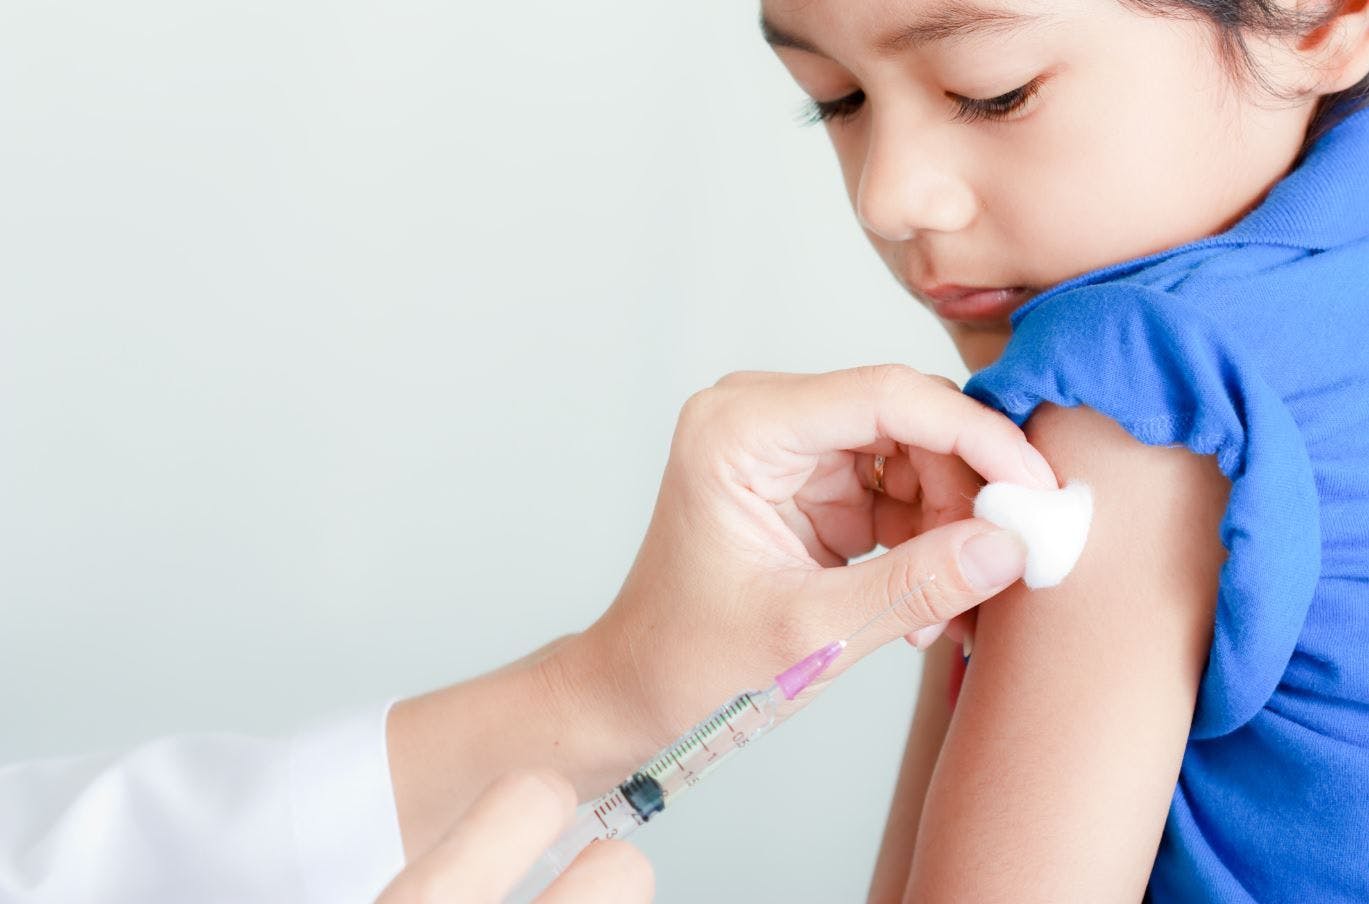 FDA Expands EUA for Bivalent COVID-19 Vaccines to Include Children as Young as Age 5 Years